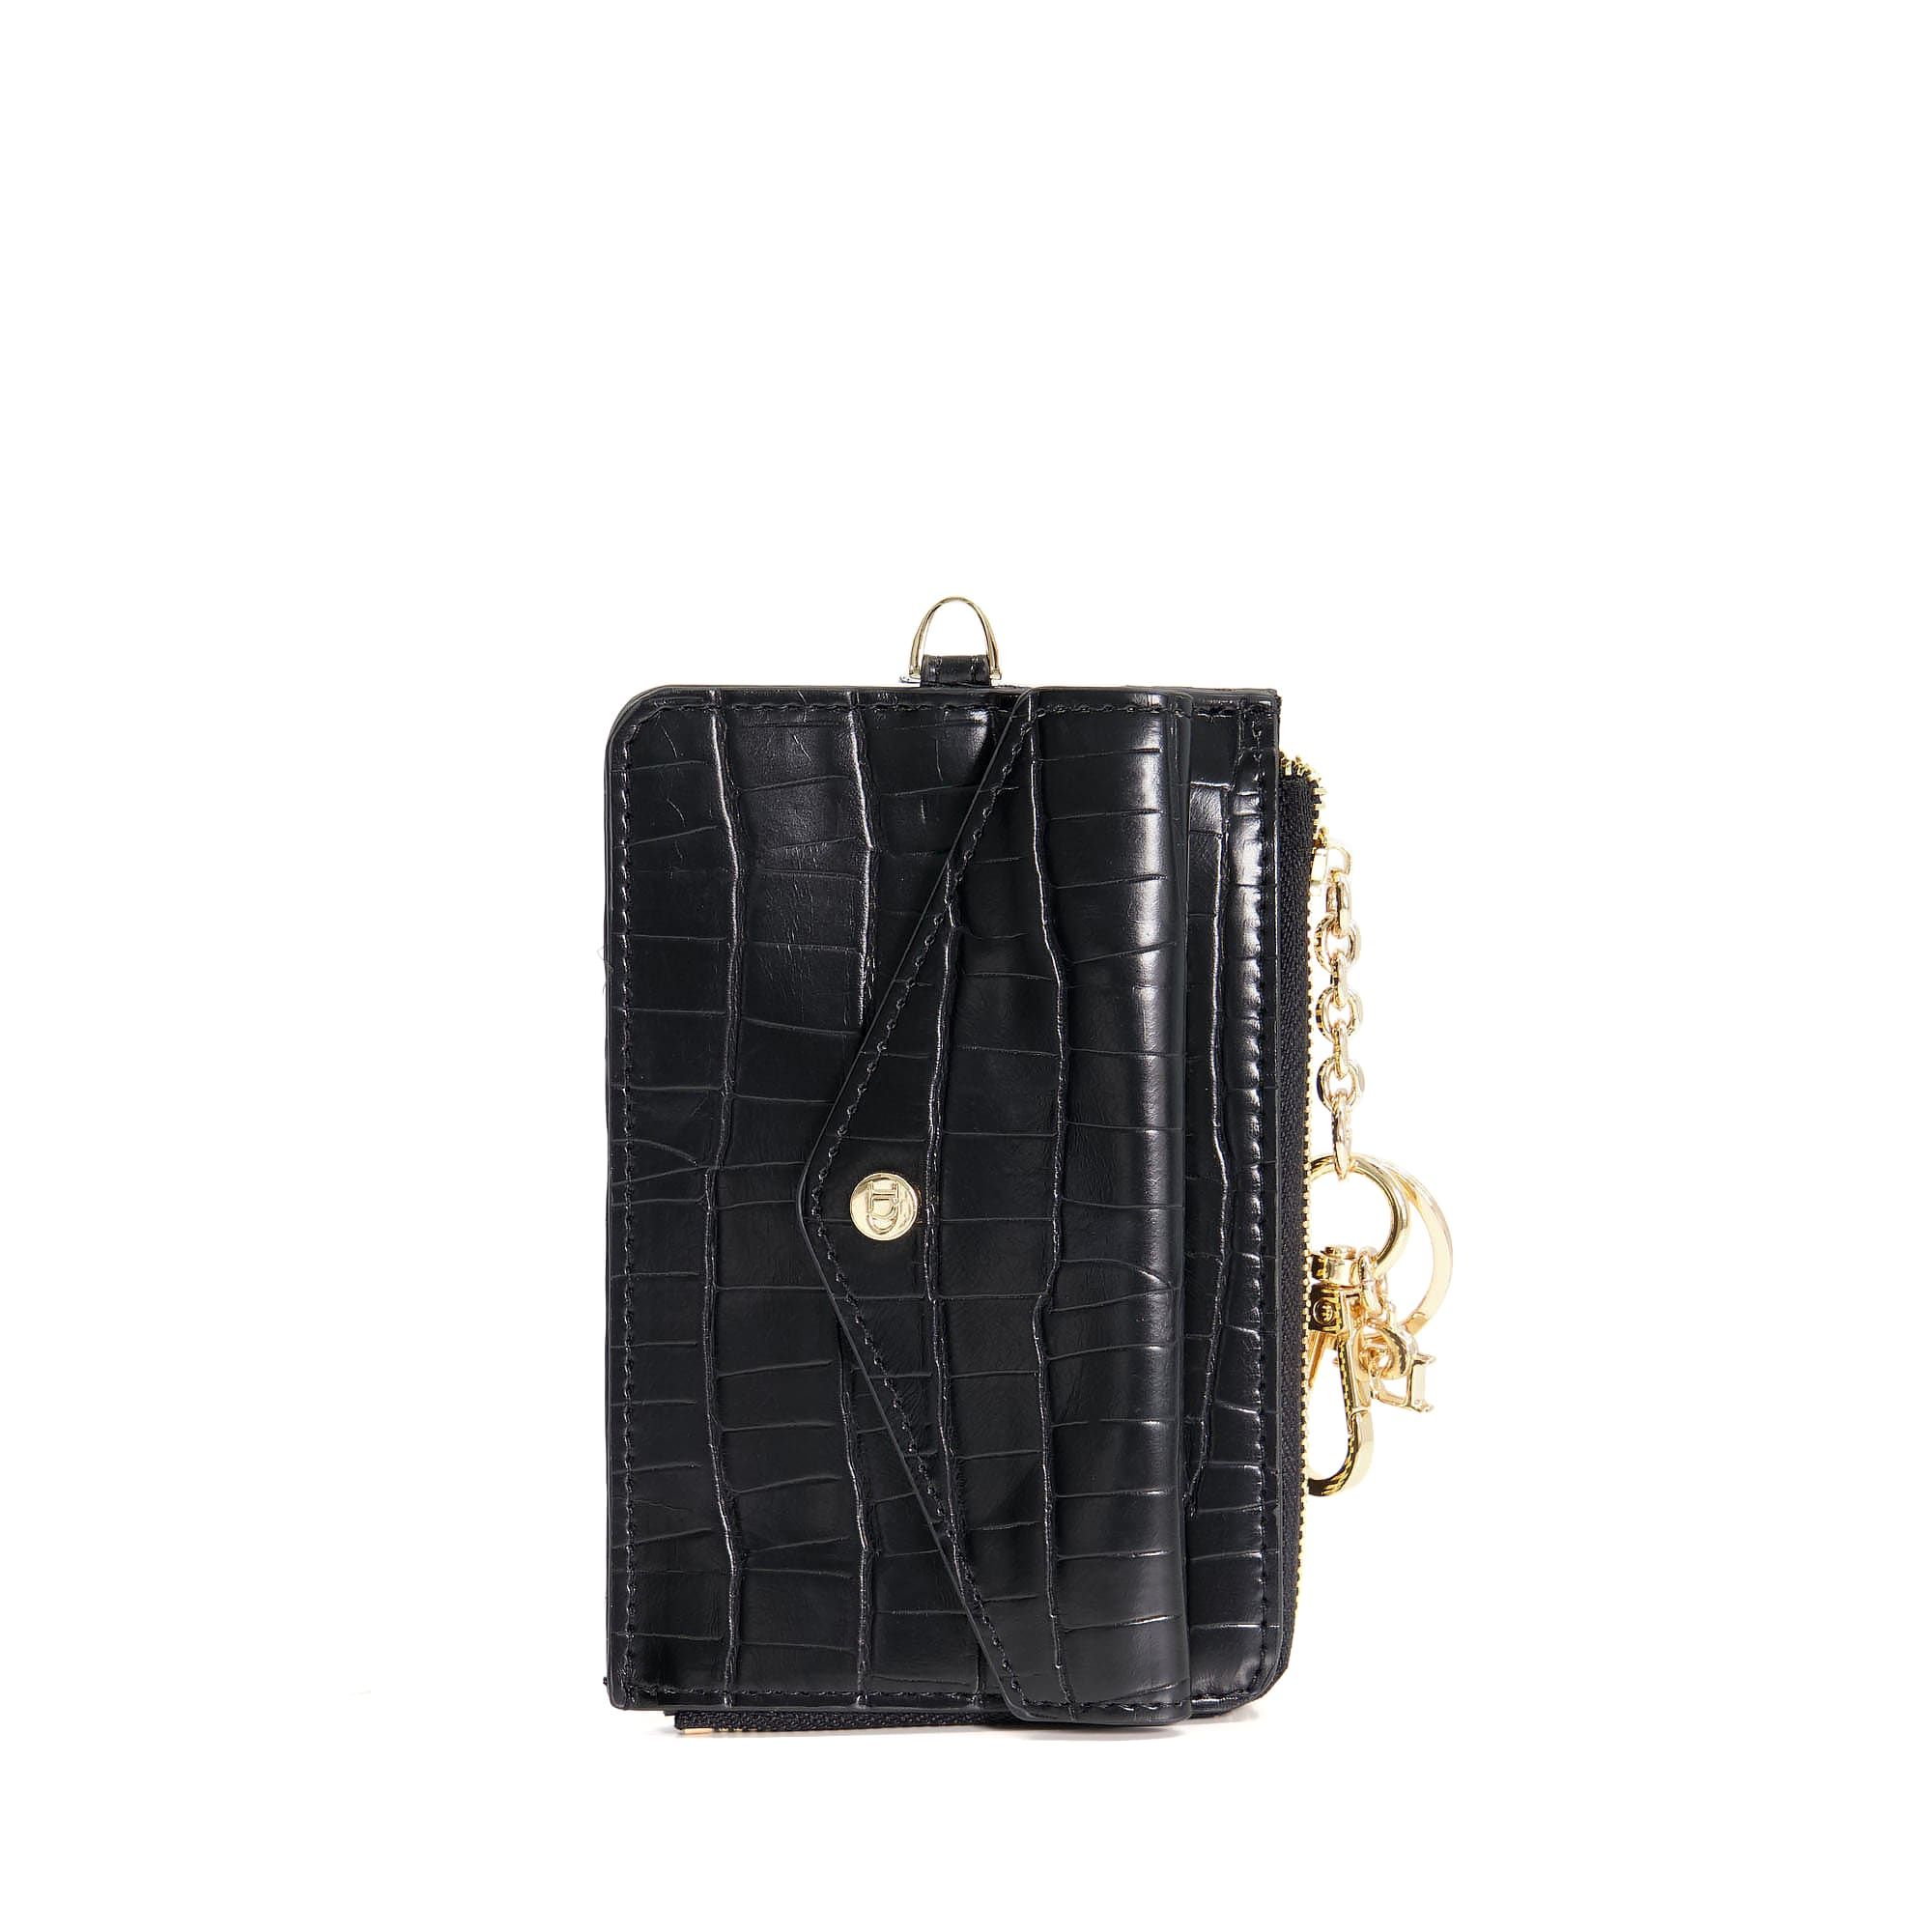 Stanton combines style with practicality, allowing you to carry your cards and change hands-free. This slimline piece has a chic croc-effect and a long strap to be worn around your neck. Just want Stanton for your handbag? Detach the strap easily usi